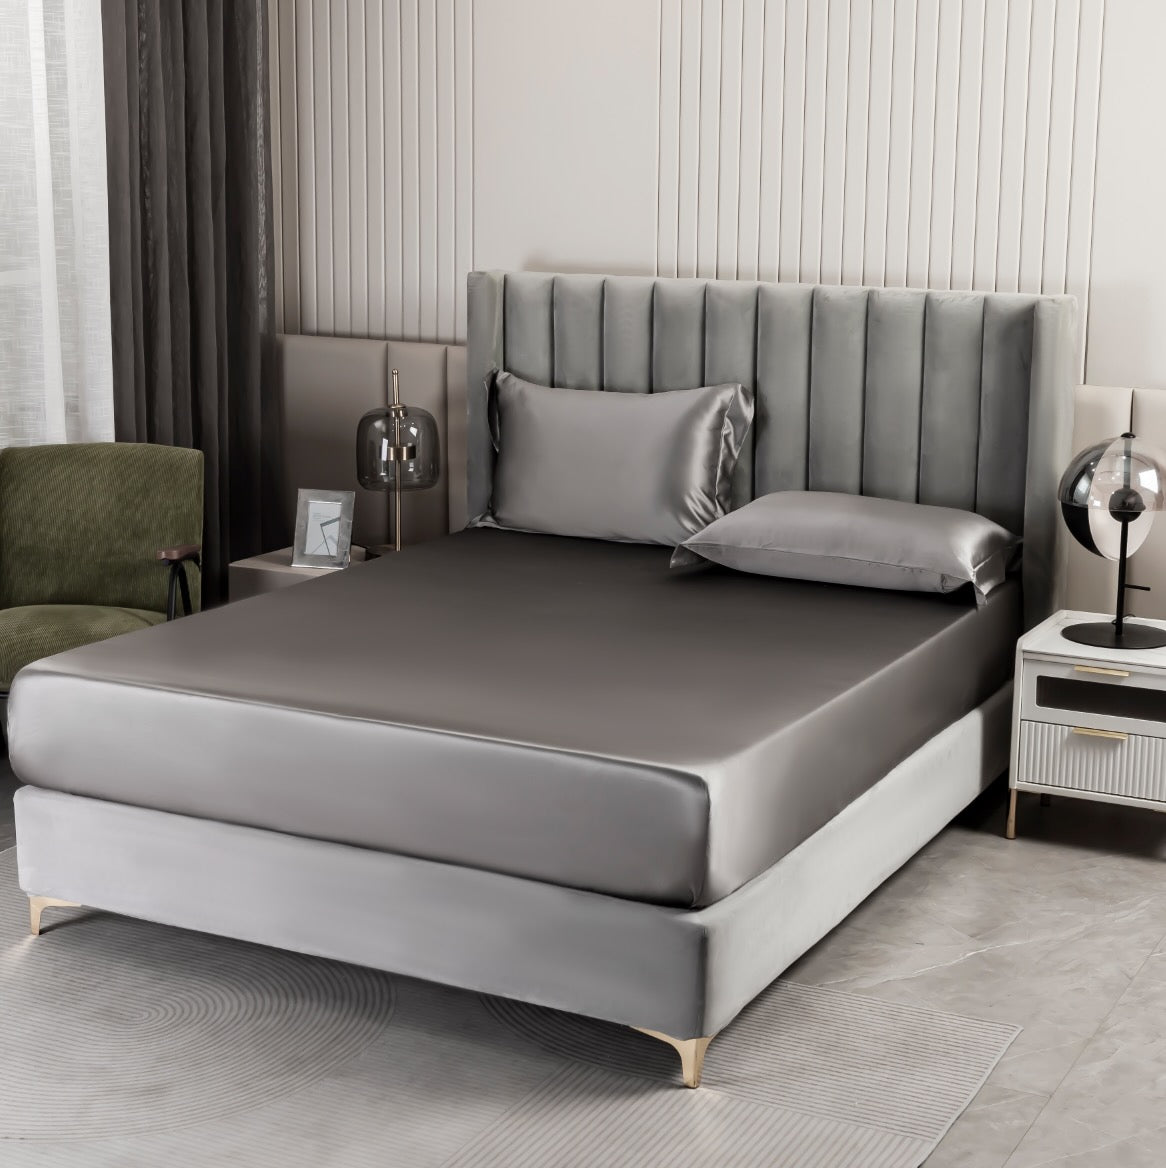 Sample: Steel Grey and Aqua Green 32 Momme Silk 6-Piece Bedding Set in Queen Size